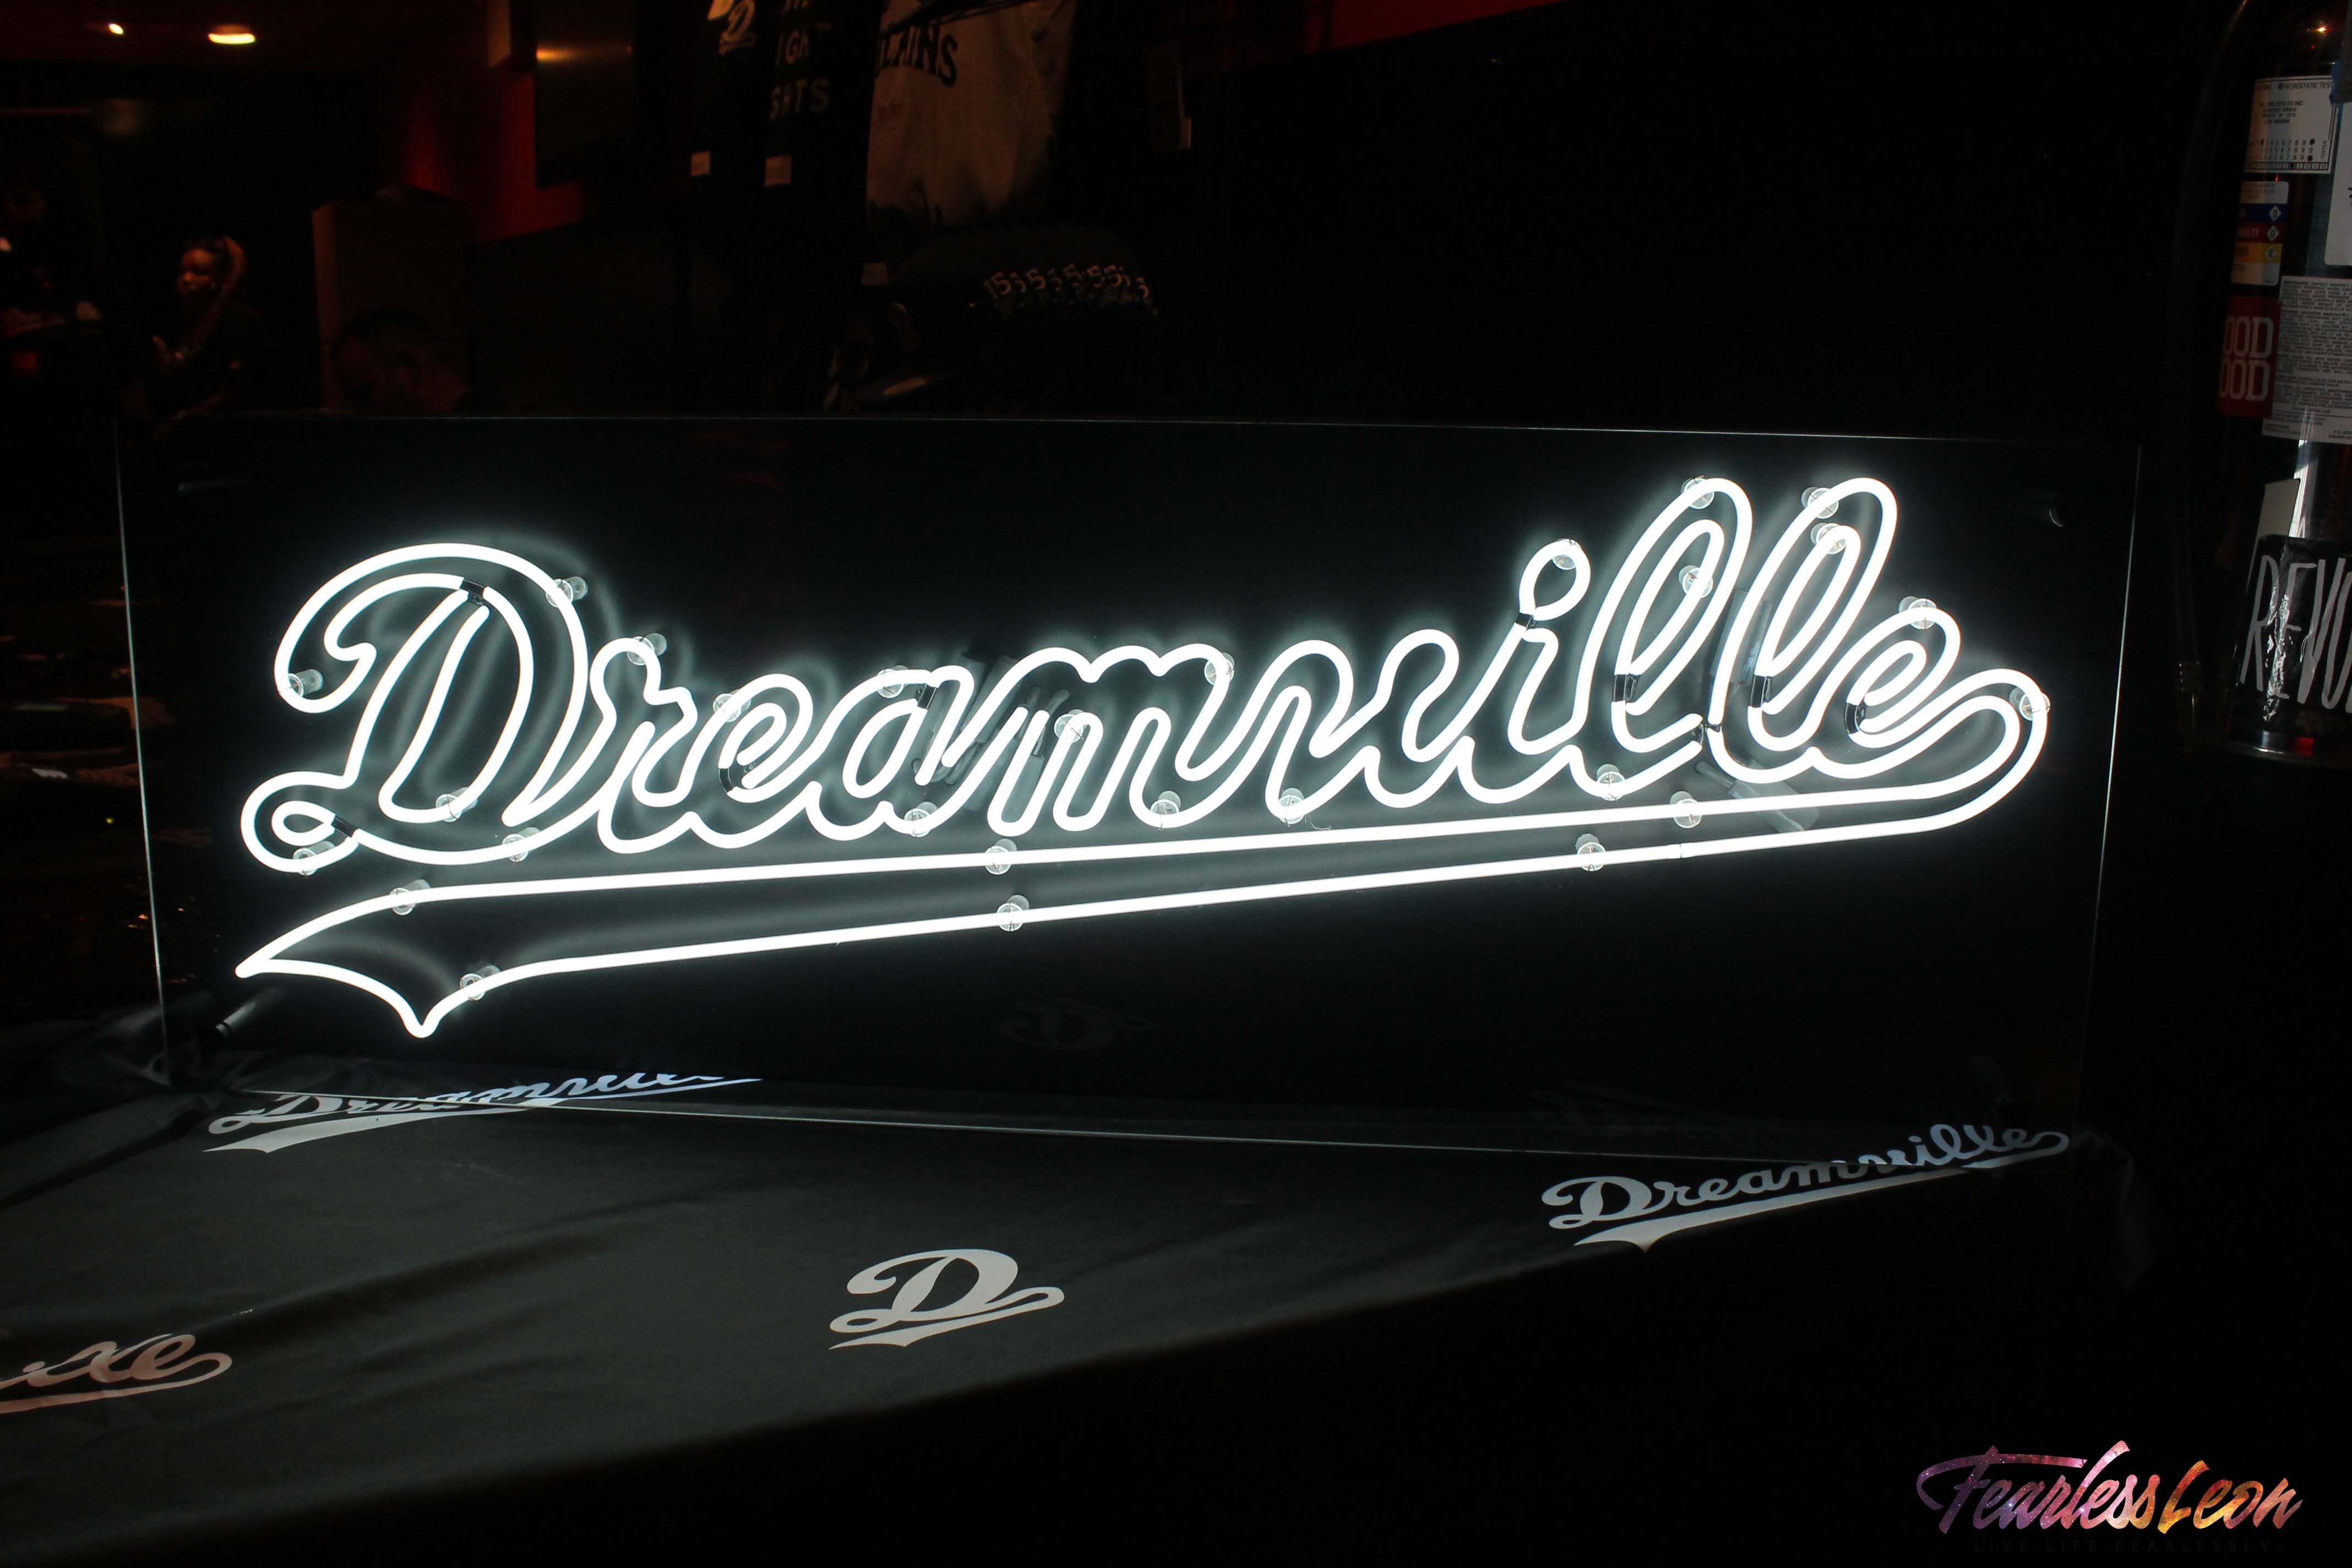 Dreamville Wallpapers